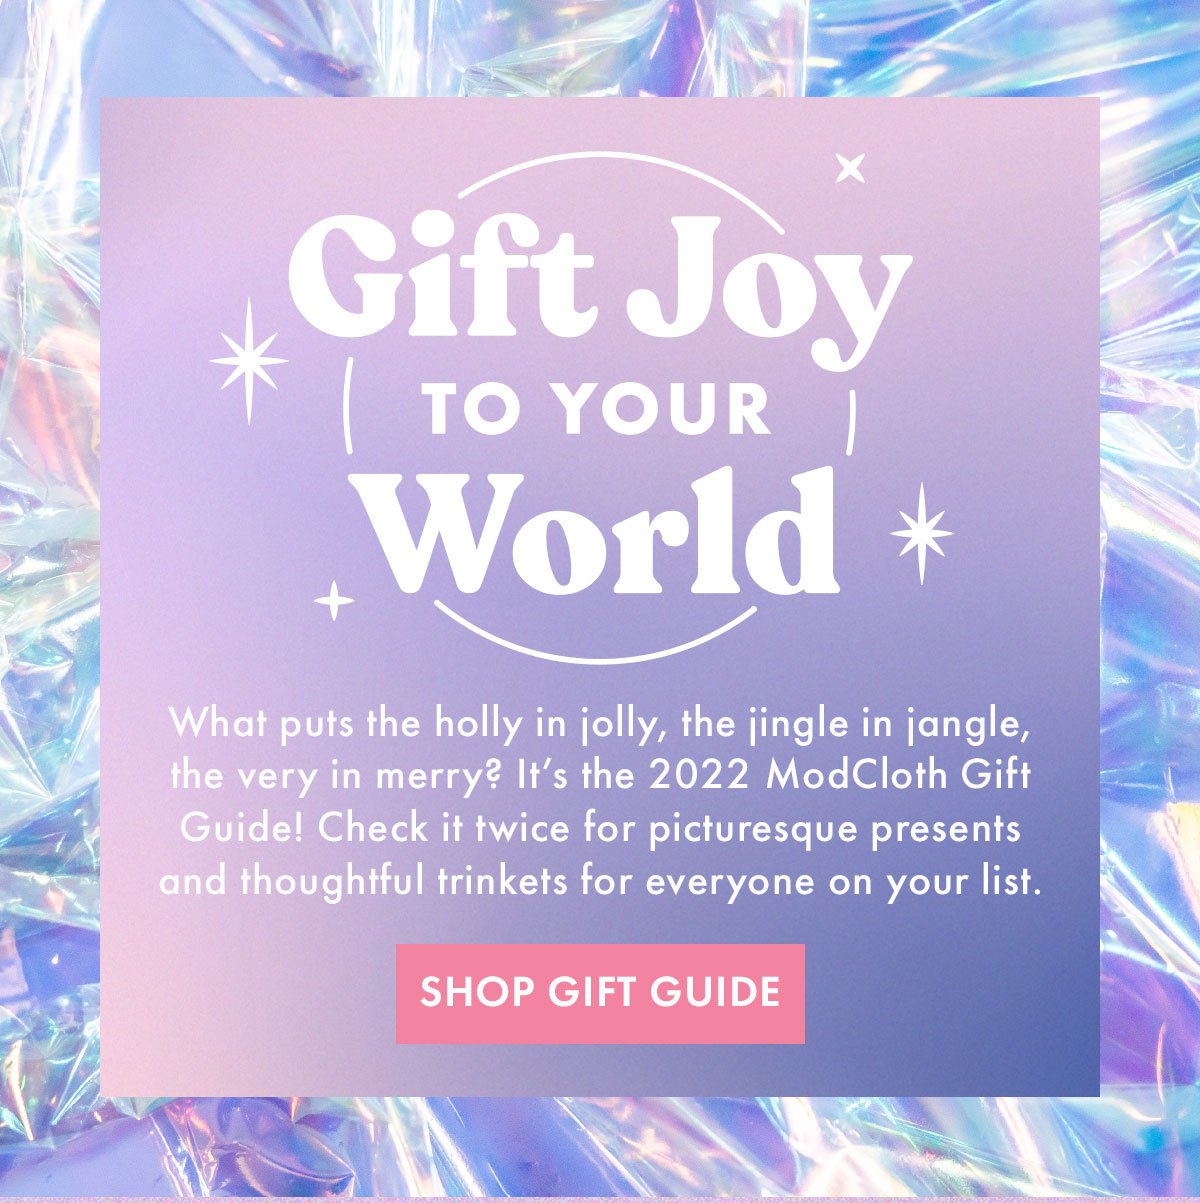 Gift Joy To Your World | Shop Gift Guide